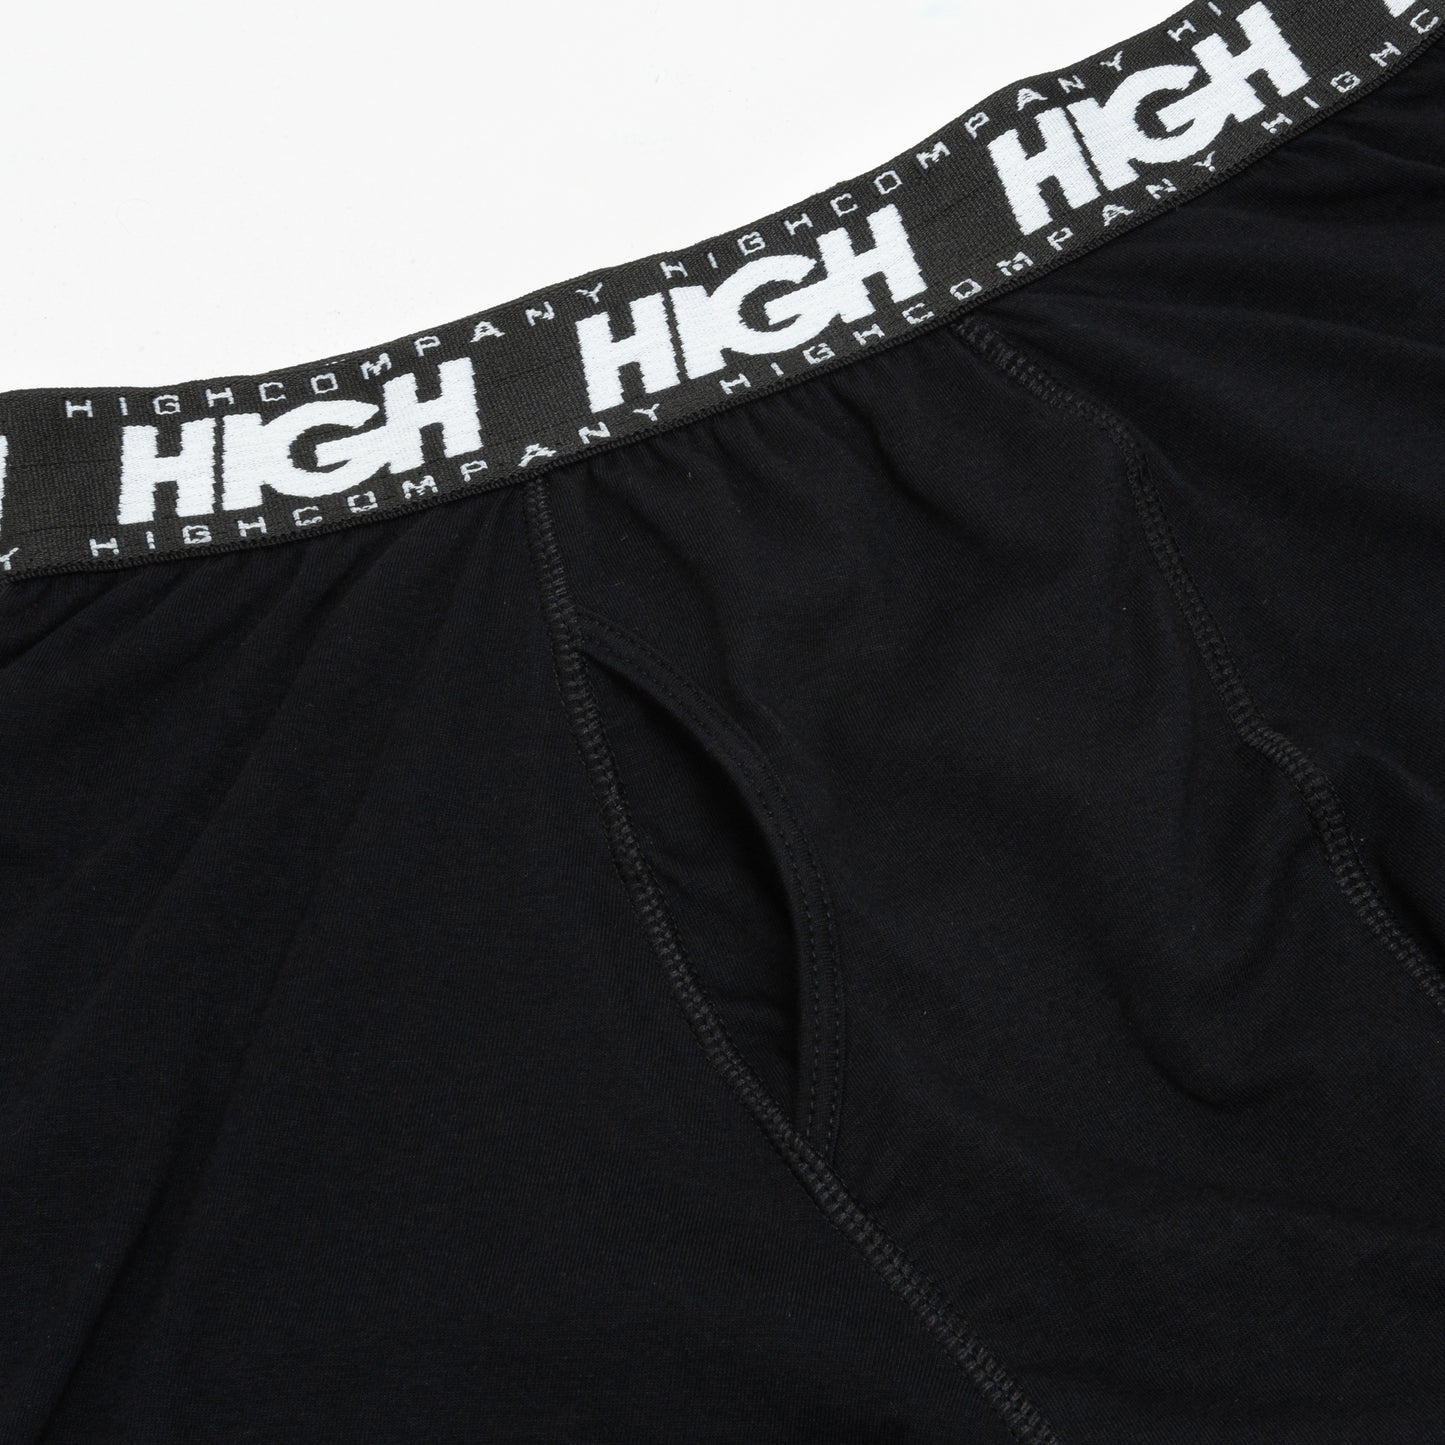 High - Boxer Shorts "Black" - THE GAME